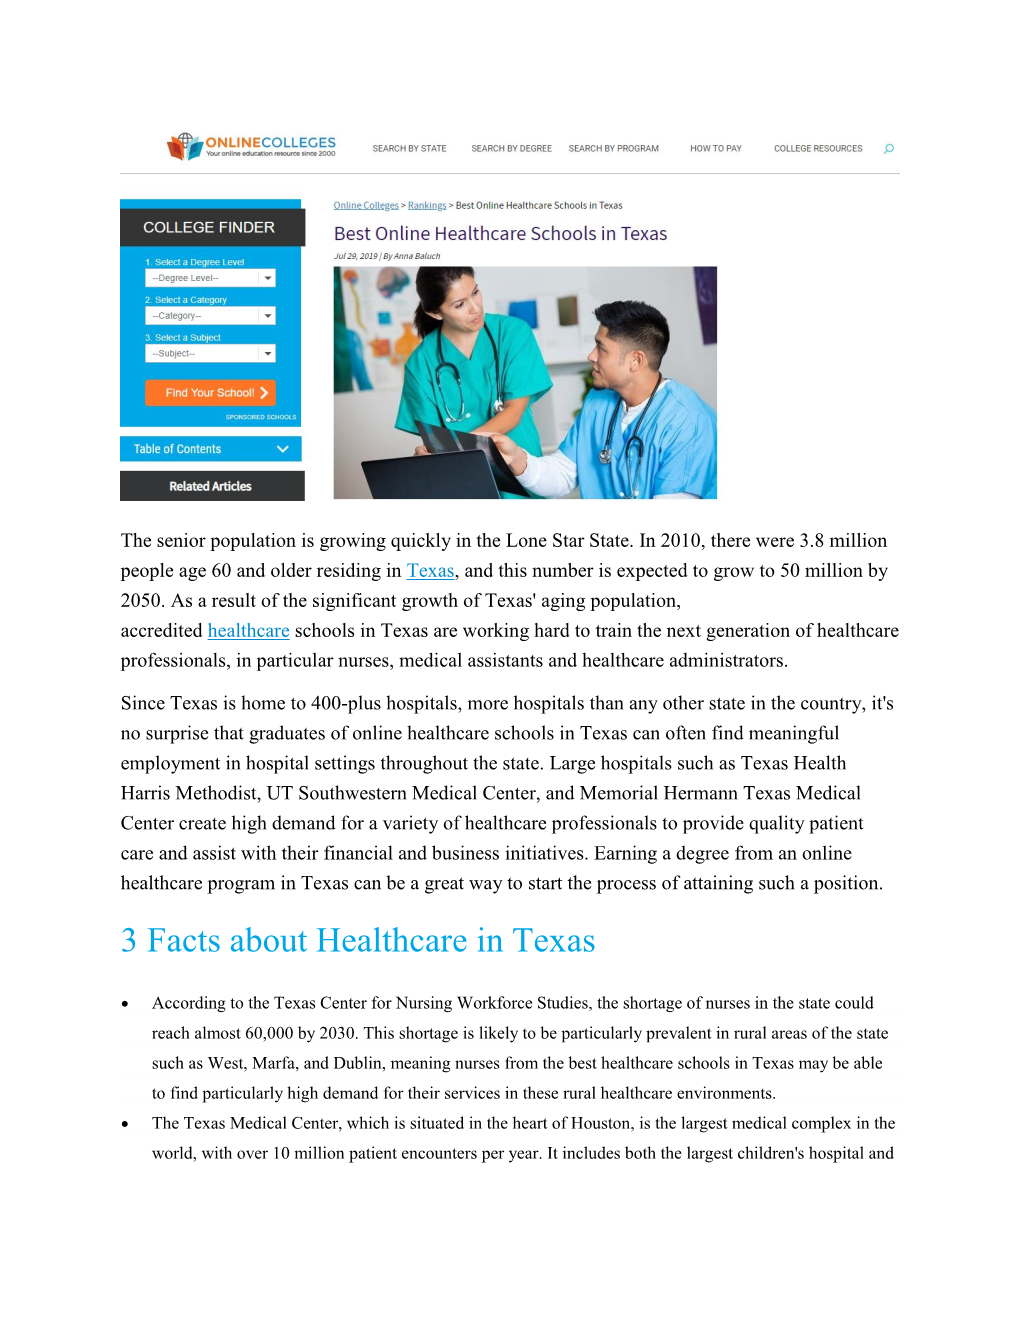 3 Facts About Healthcare in Texas